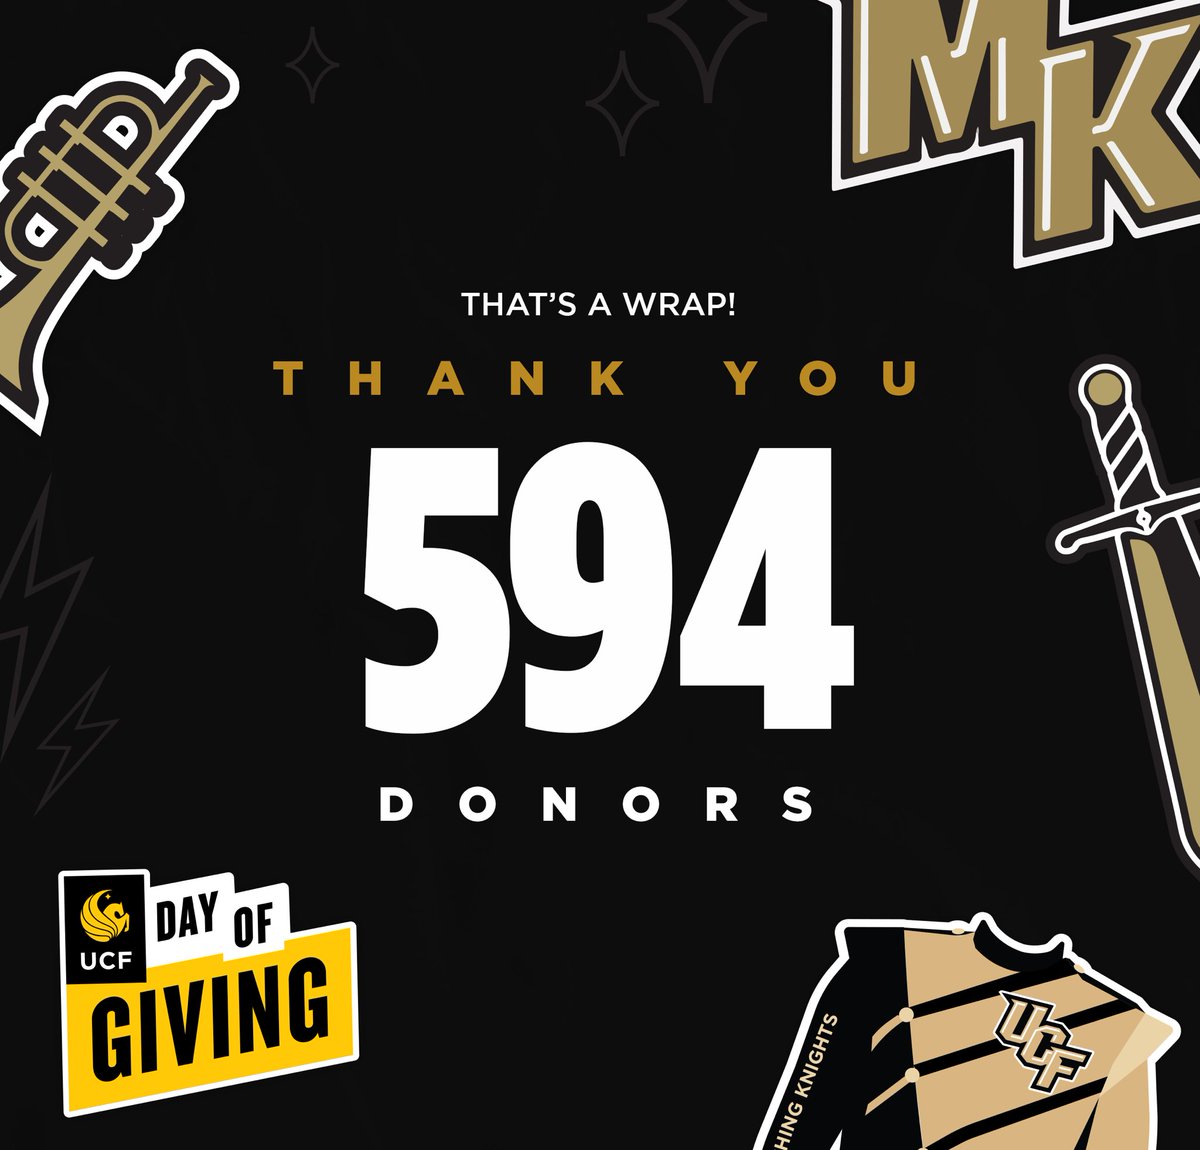 Thank you to our friends, family, alumni and students who donated to the Marching Knights for the #UCFDayofGiving! We cannot thank you enough for your support! Go Knights, Charge On! ⚔️